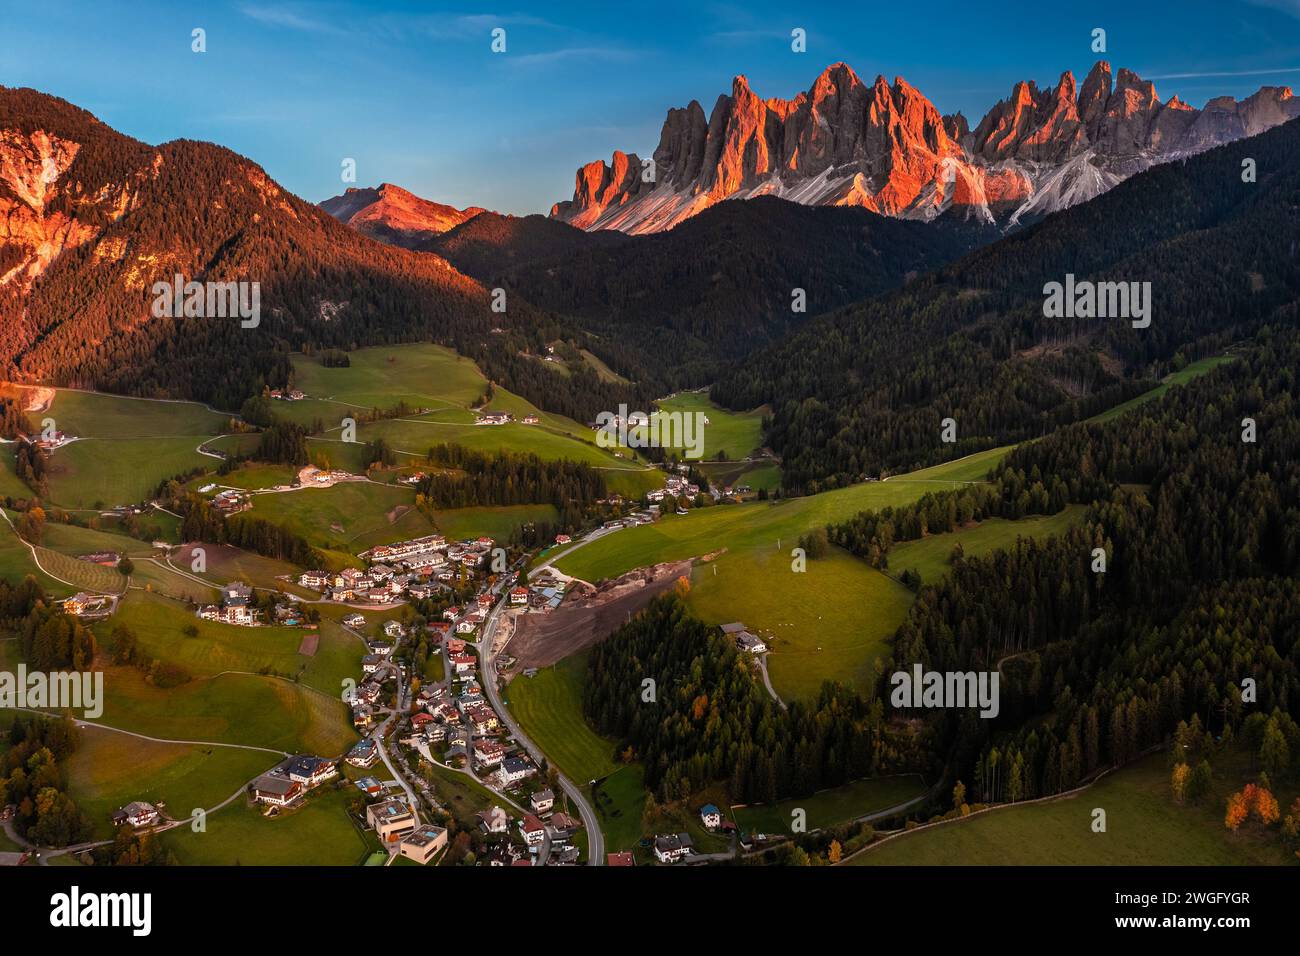 Val Di Funes, Dolomites, Italy - Aerial view of the Val di Funes province at South Tyrol with St. Johann church in San Valentino, the Italian Dolomite Stock Photo